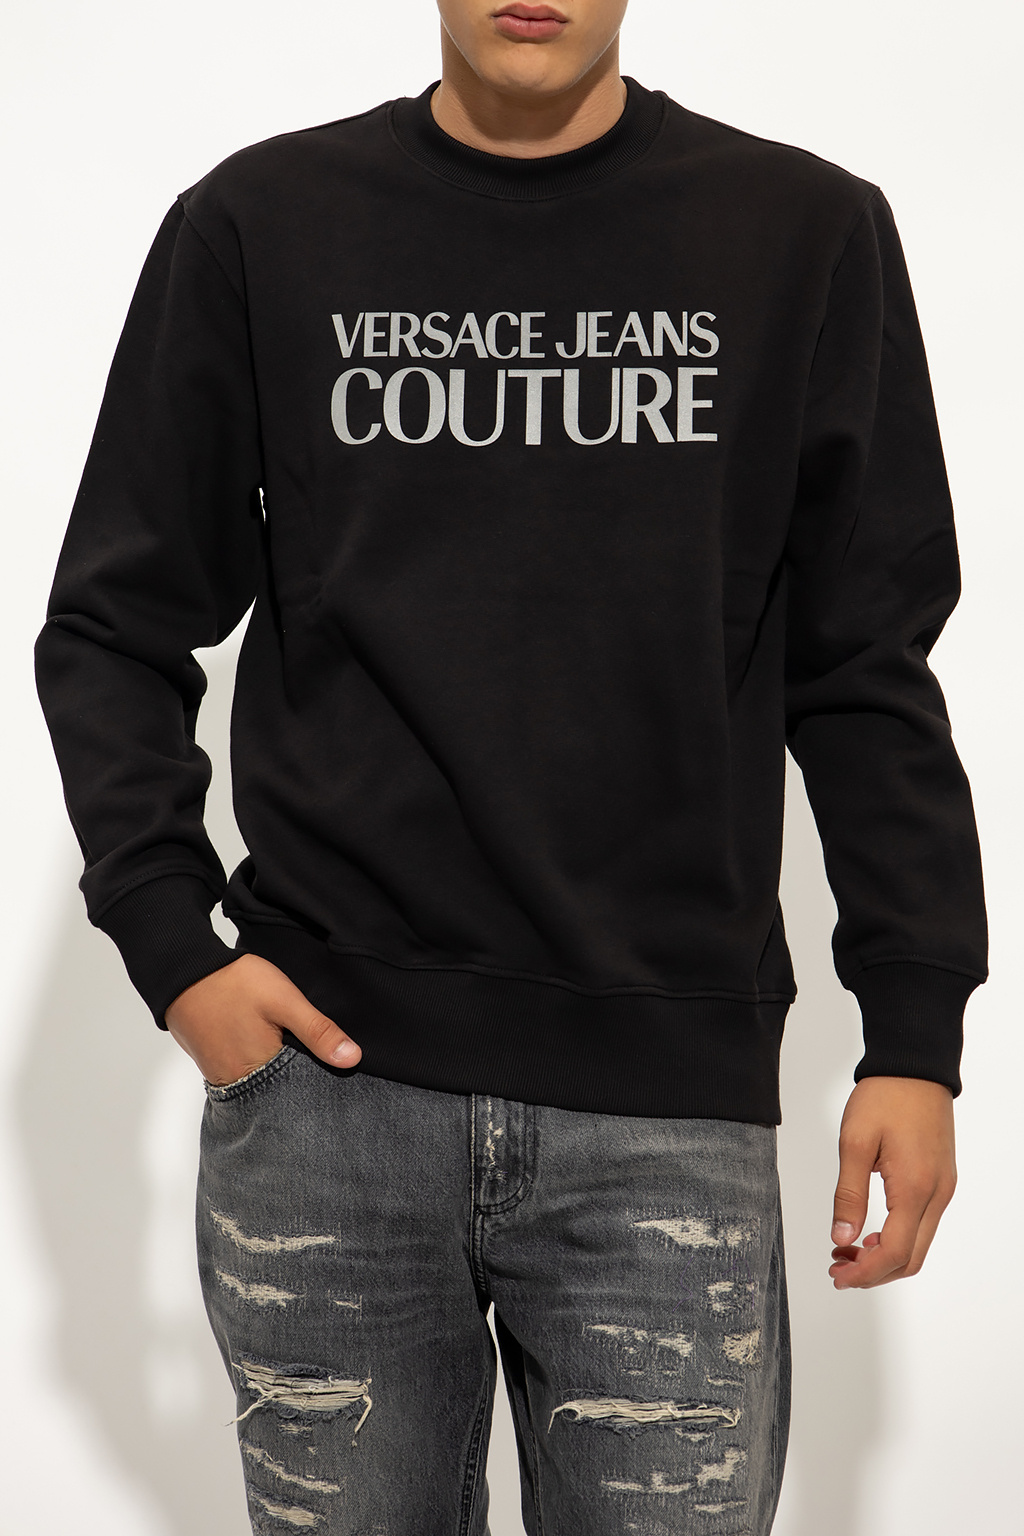 Versace Jeans Couture Tommy Hilfiger hoodie USA